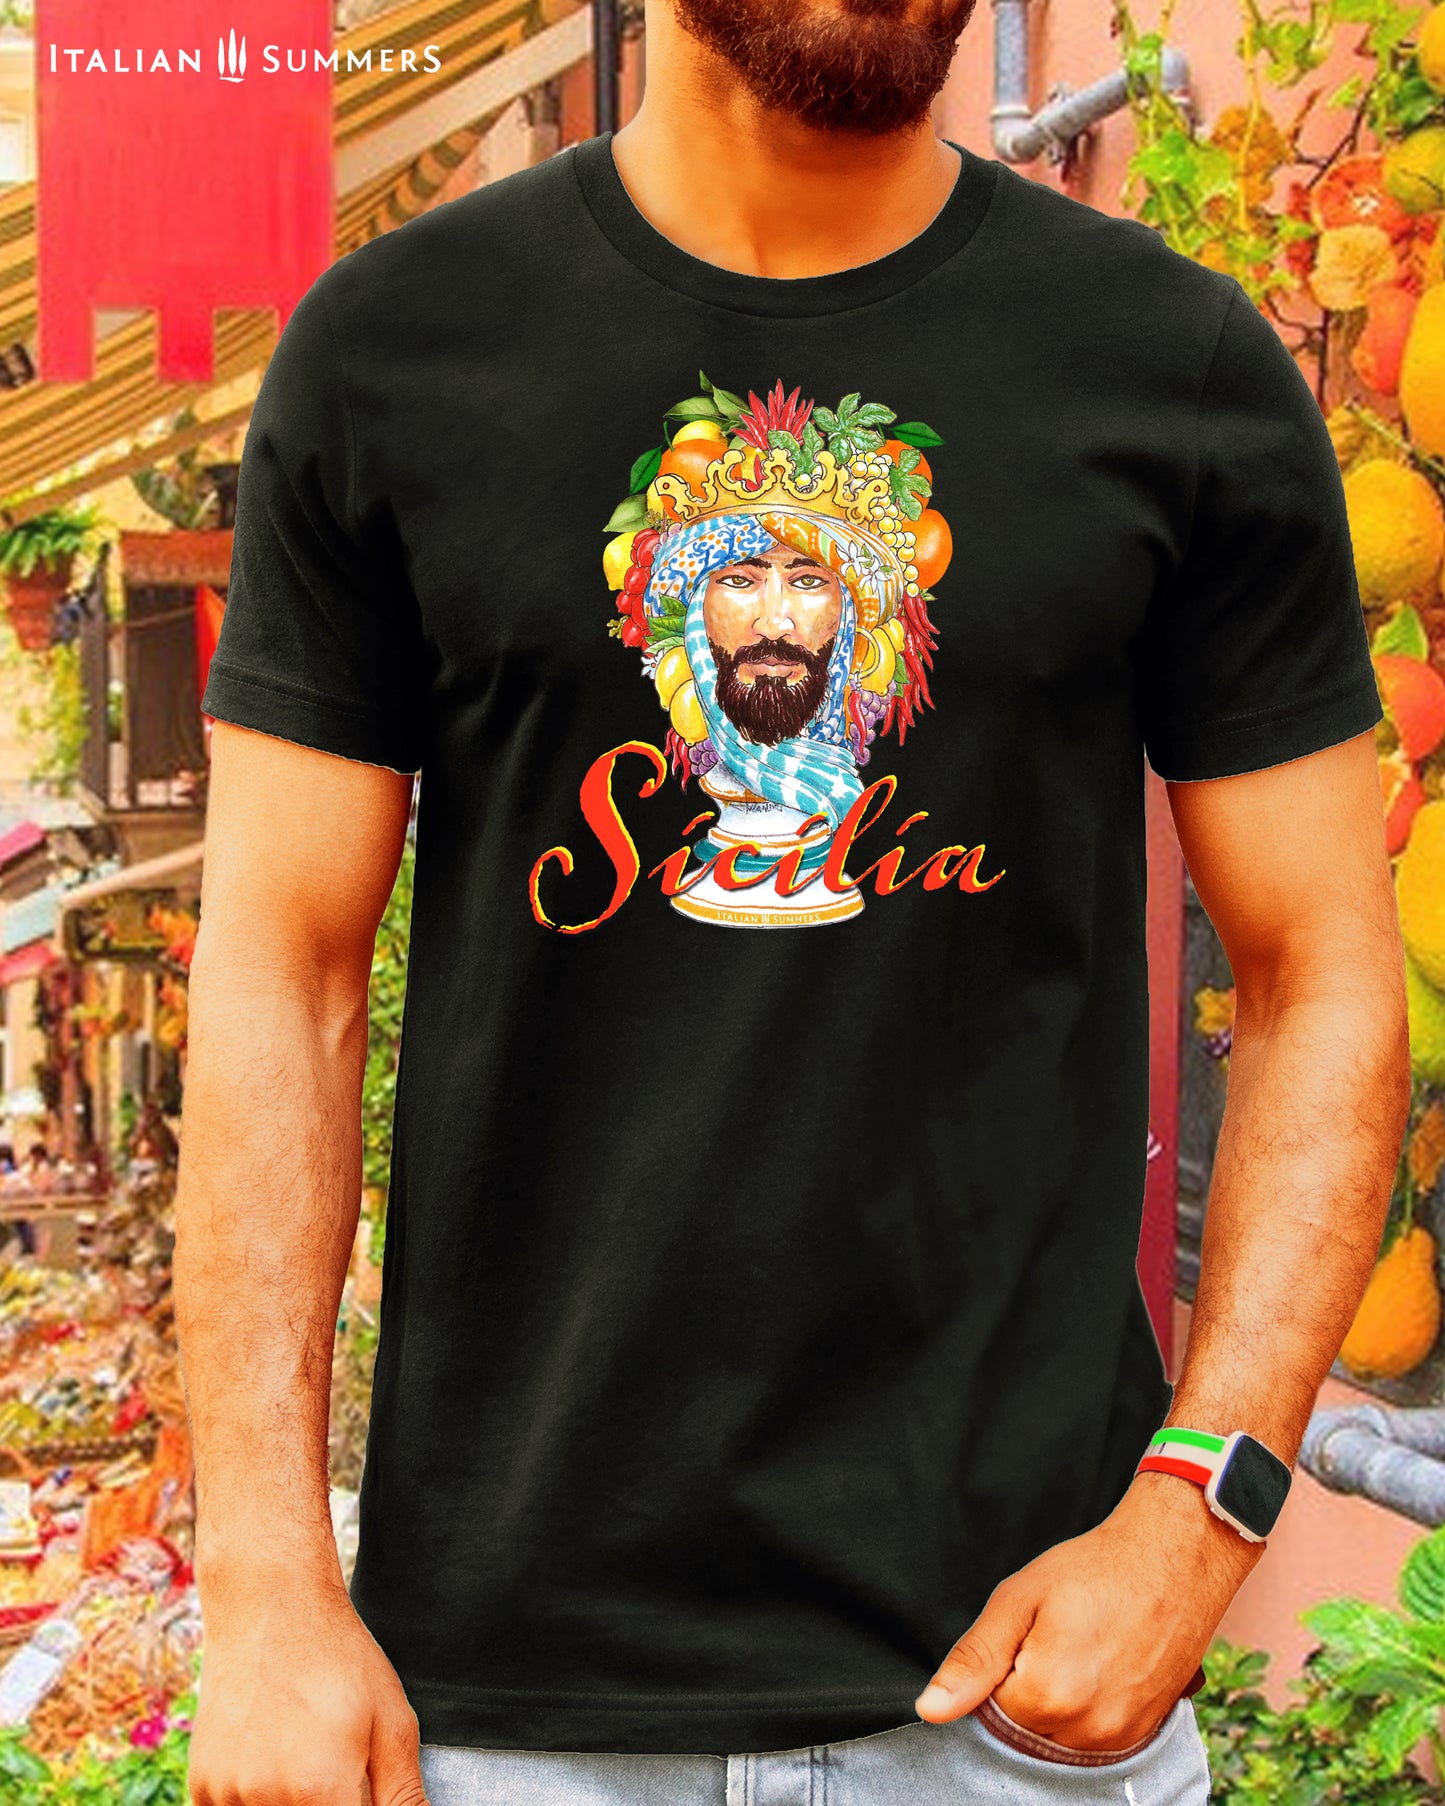 Italy inspired cotton unsex crew-neck T shirt  with a hand-illustrated  print of a decorative  Moor's head from the Sicilian tradition of Caltagirone ceramic sculptures depicting  the head of a Moorish nobleman with turban and decorative fruits.